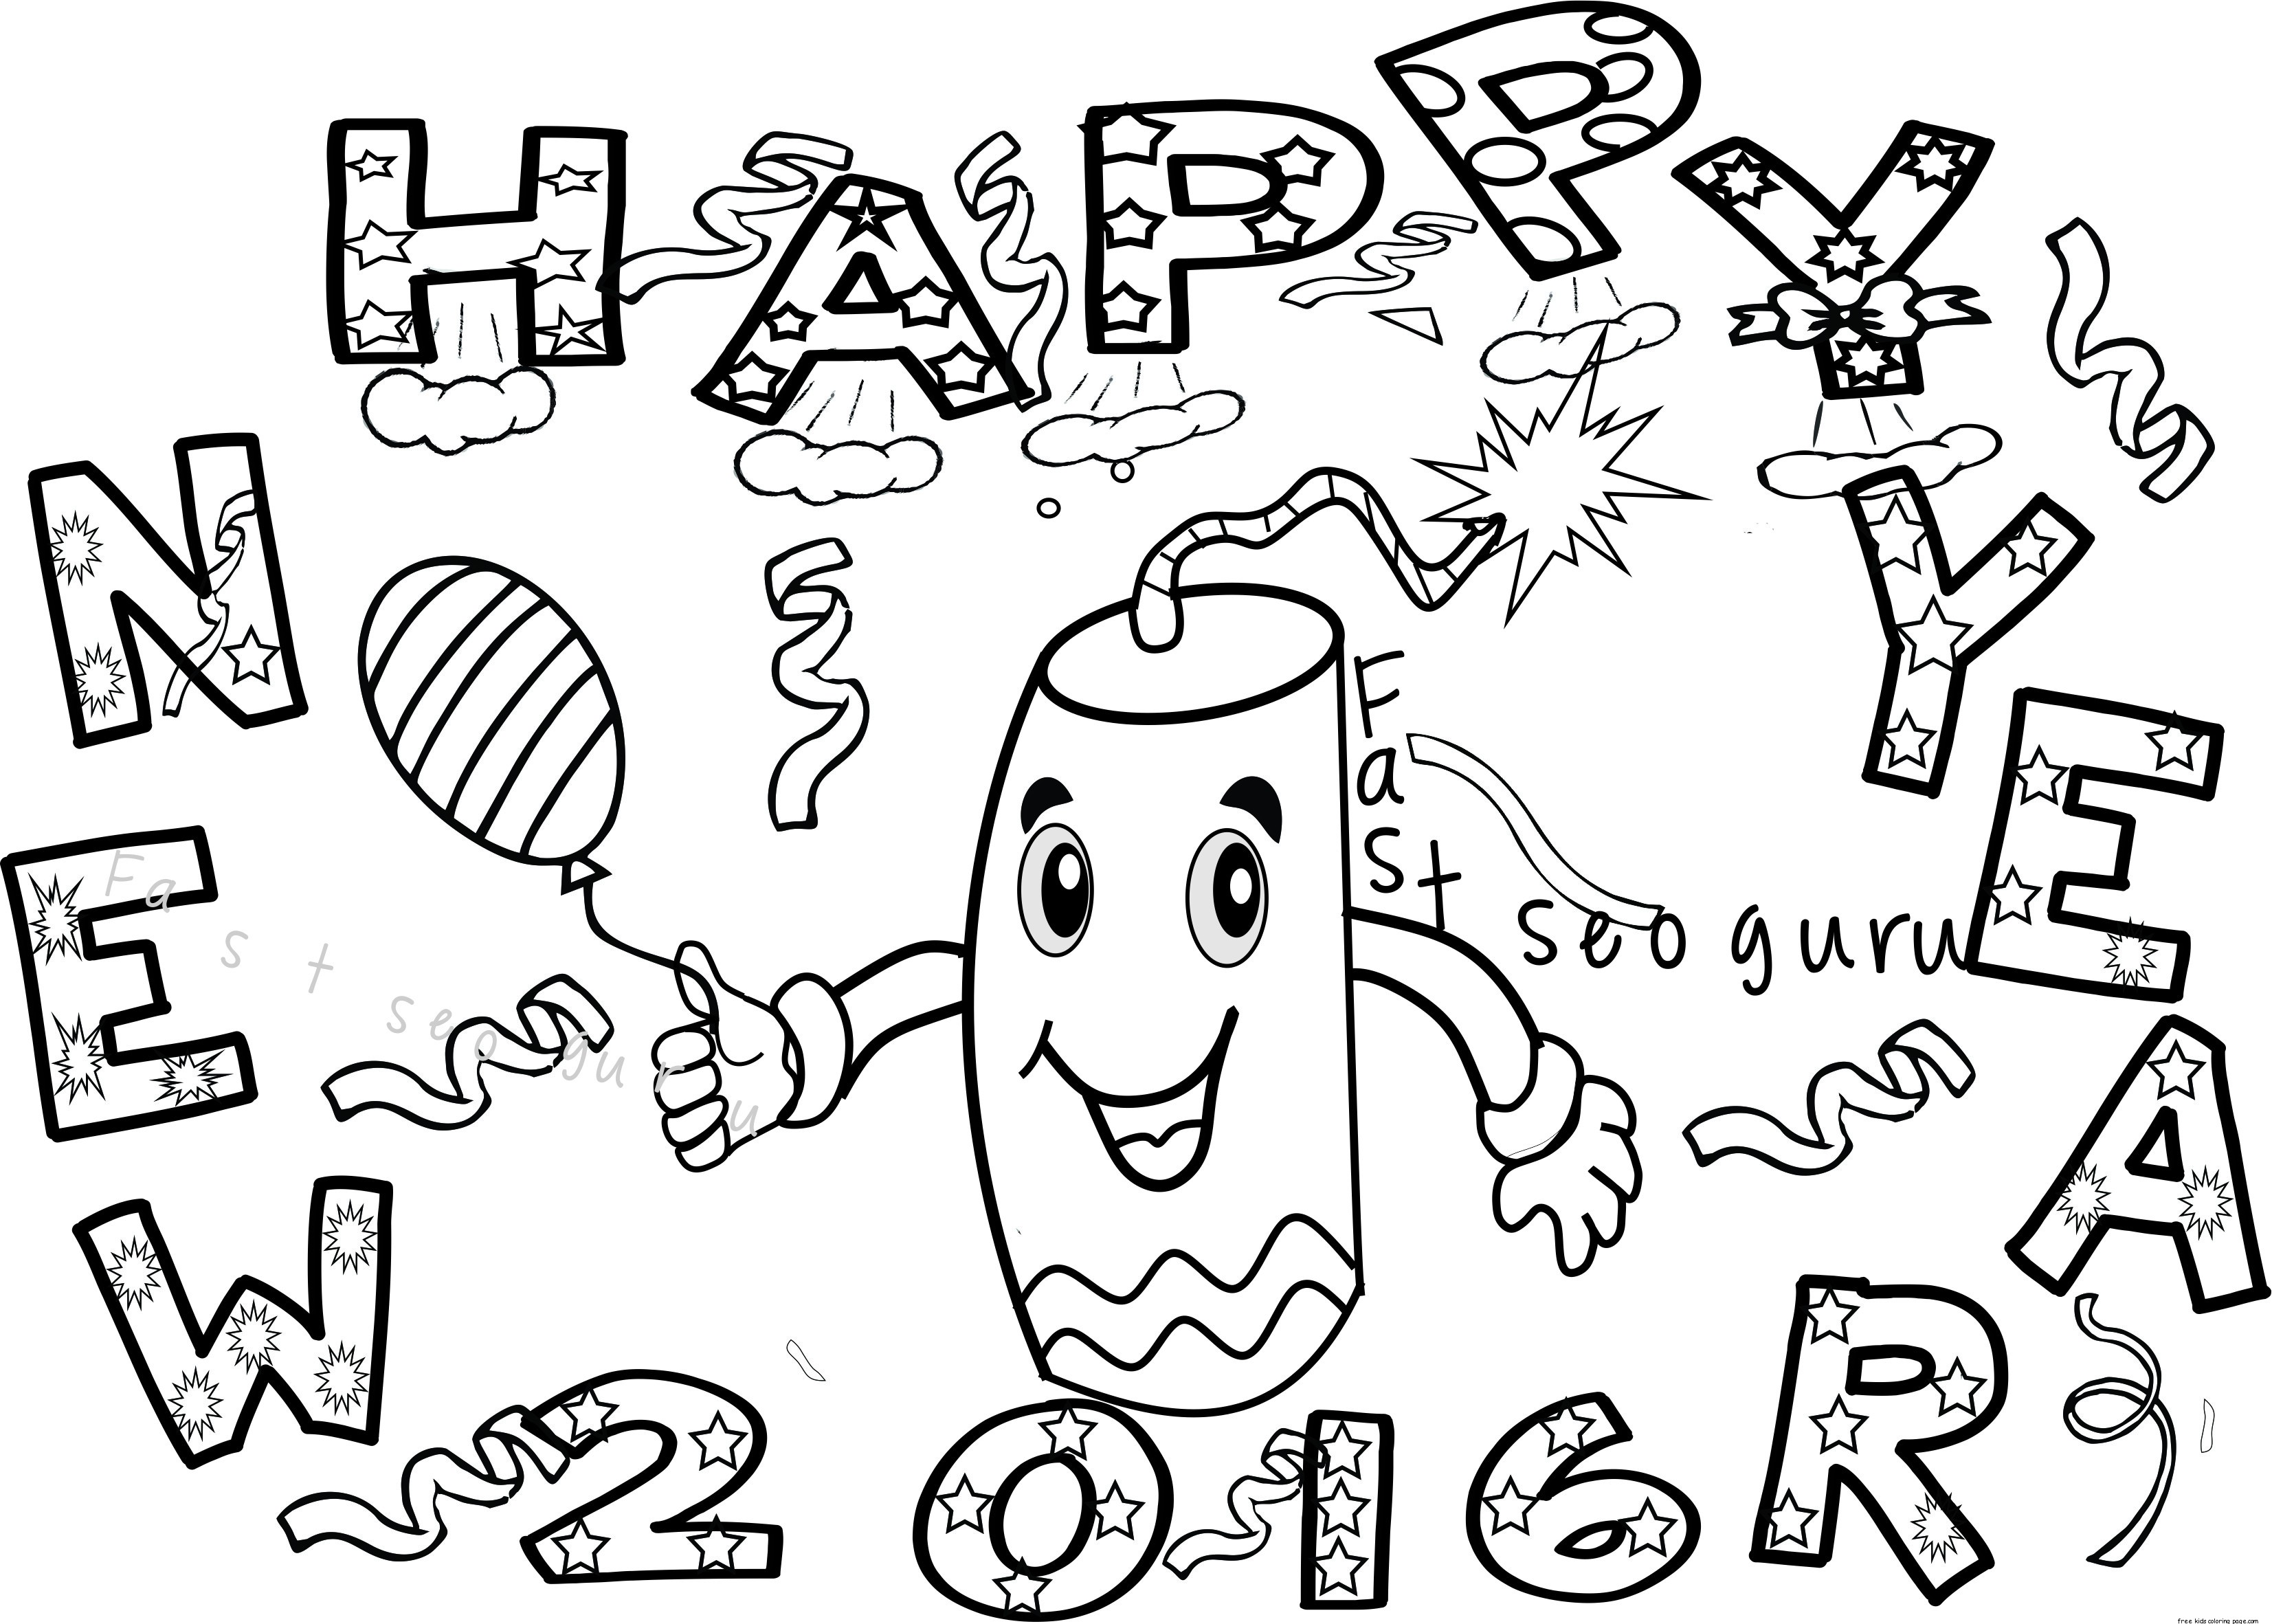 New Years Eve Coloring Pages Printable At GetColorings Free Printable Colorings Pages To